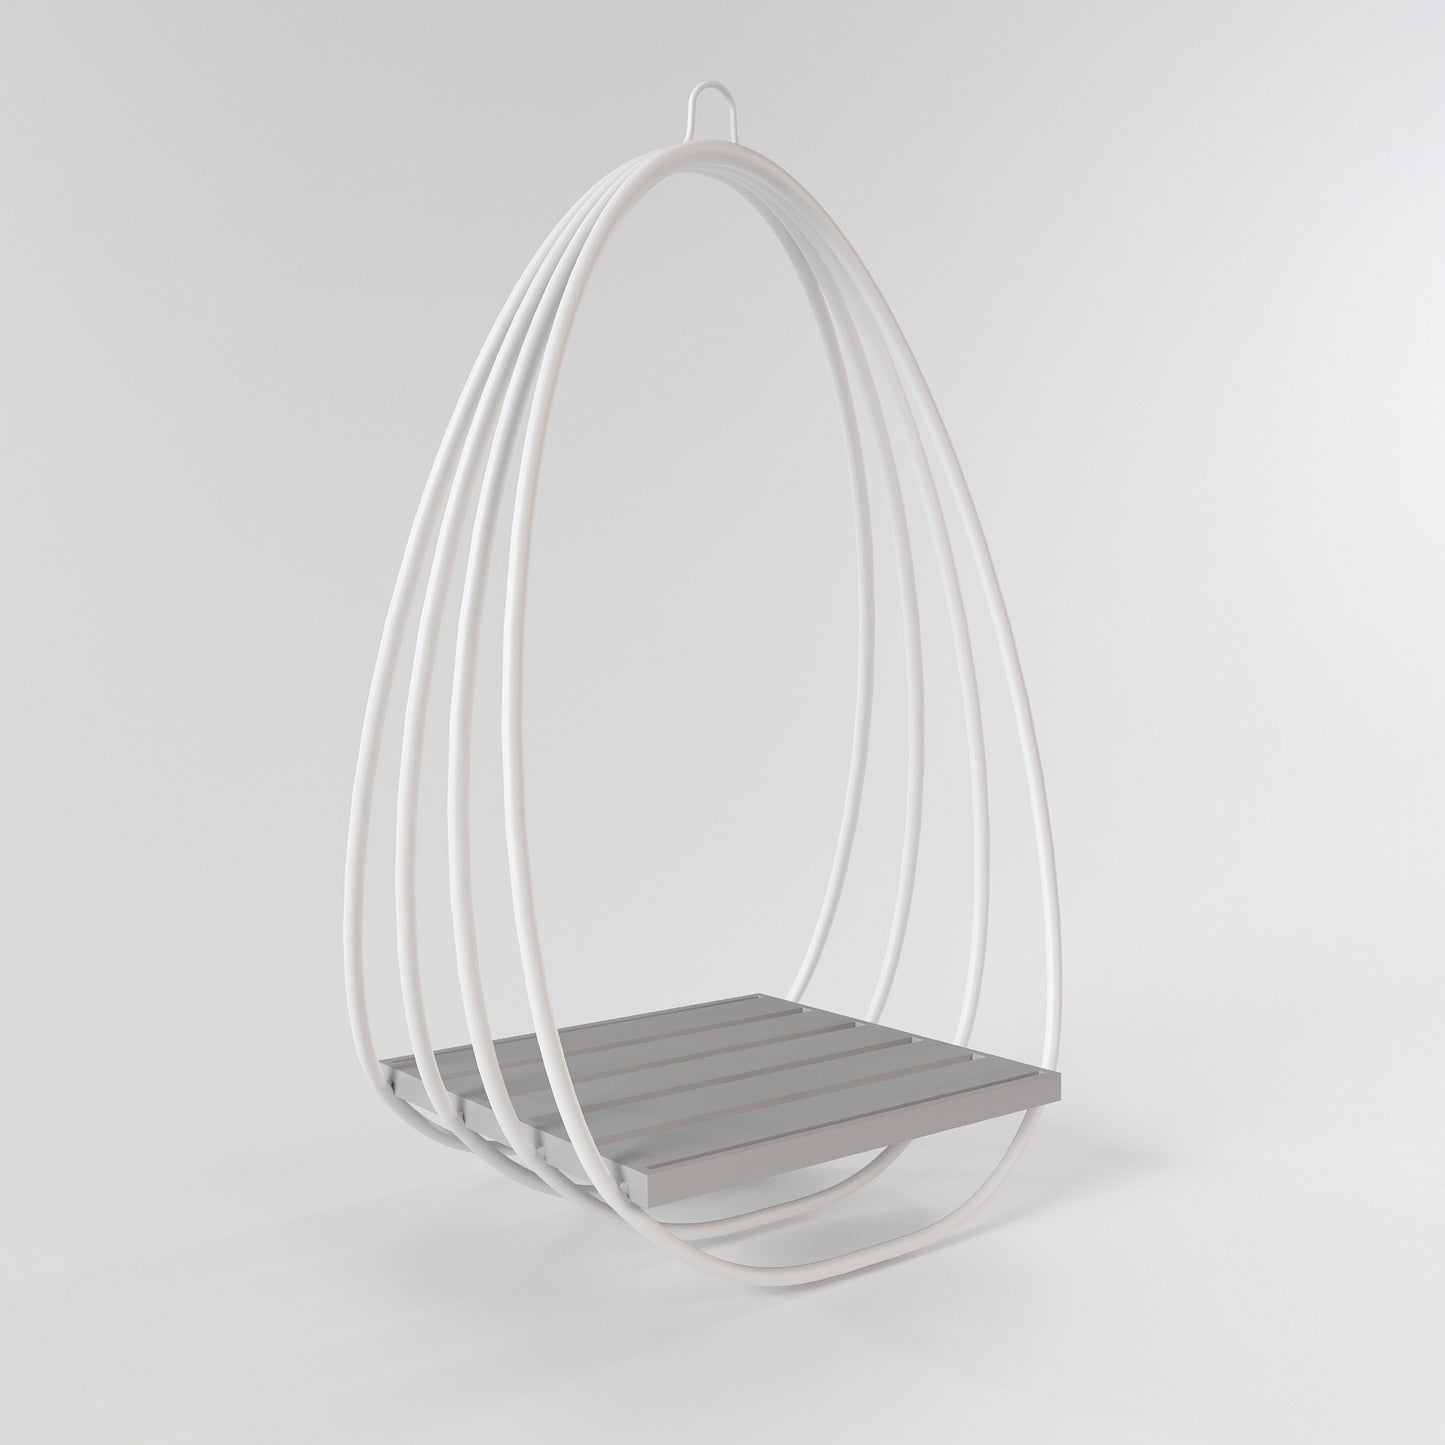 Oasis Hanging Chair w DWS